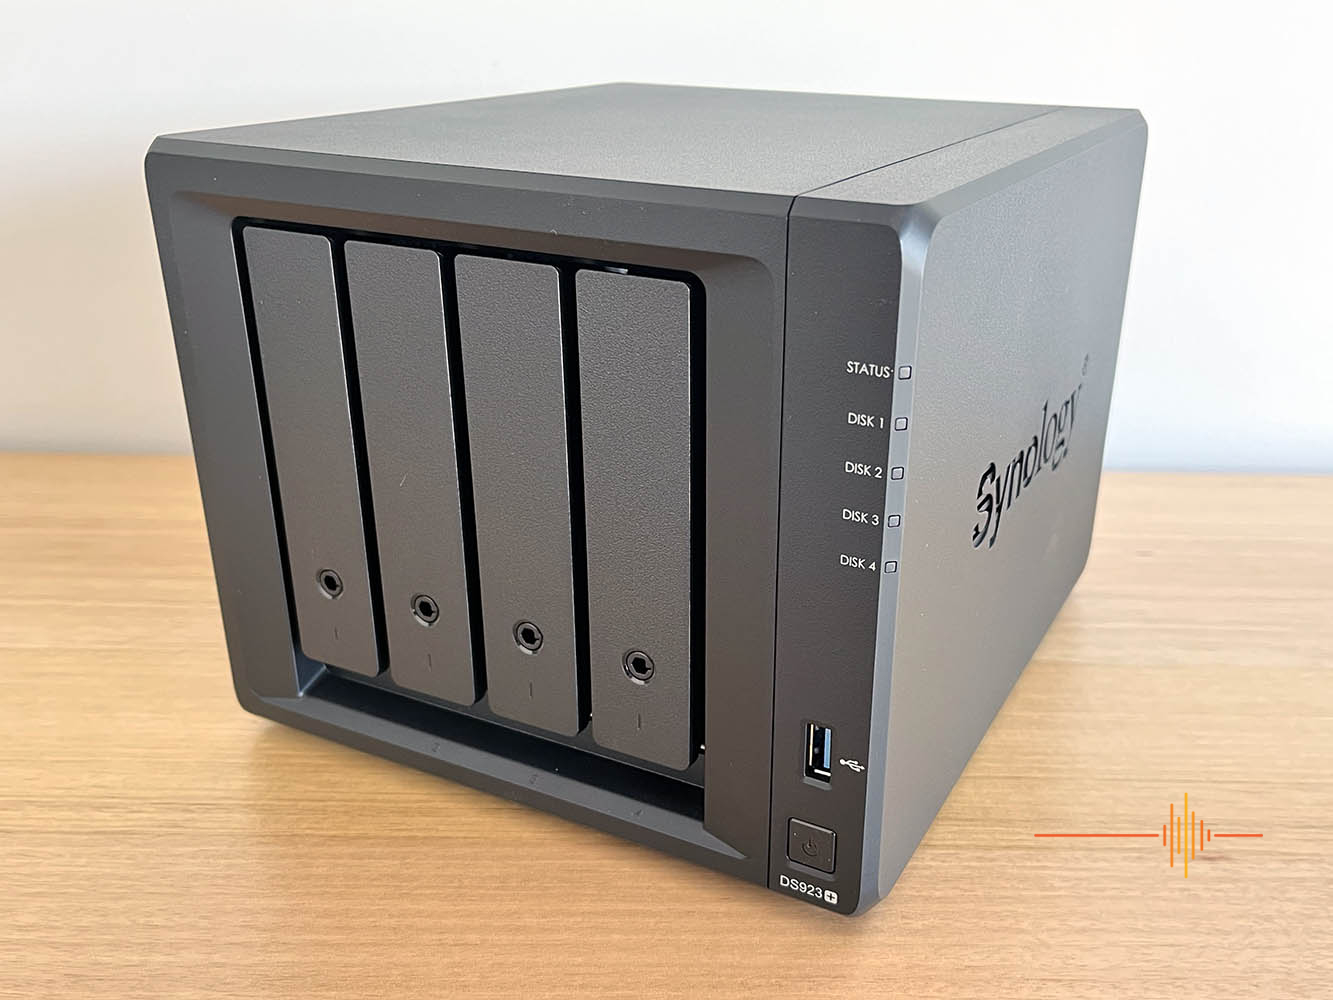 Synology DiskStation DS923+ review: An AMD-powered NAS with a few